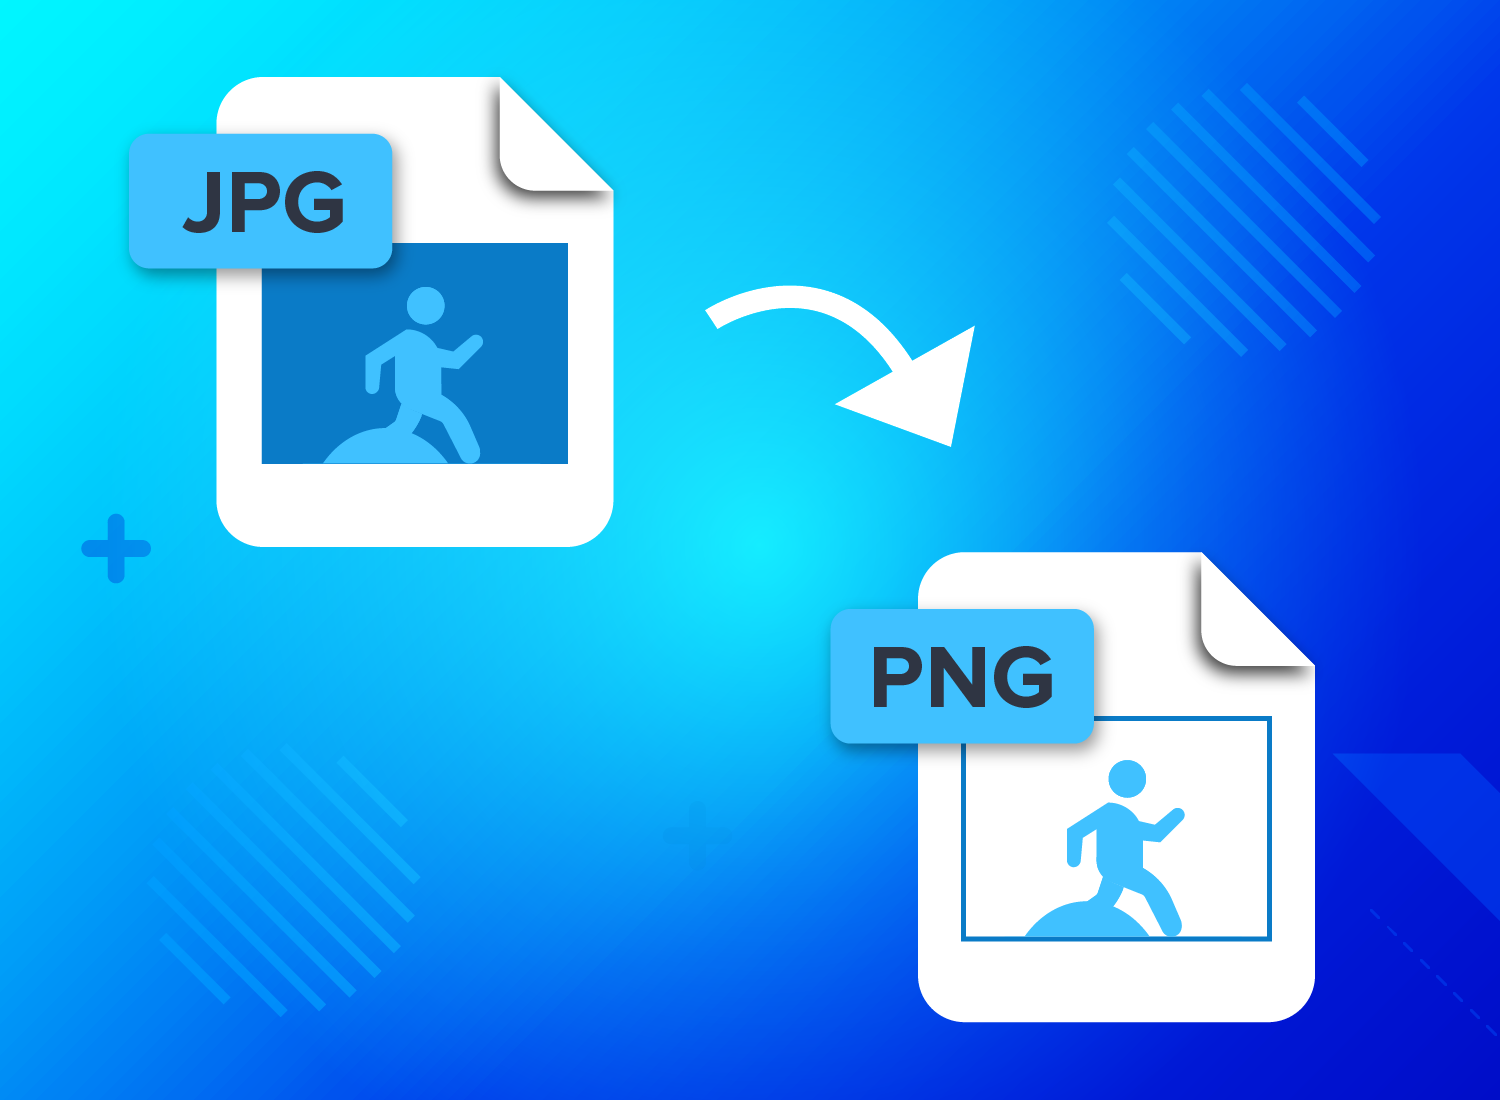 JPG vs. PNG: Which is Better?